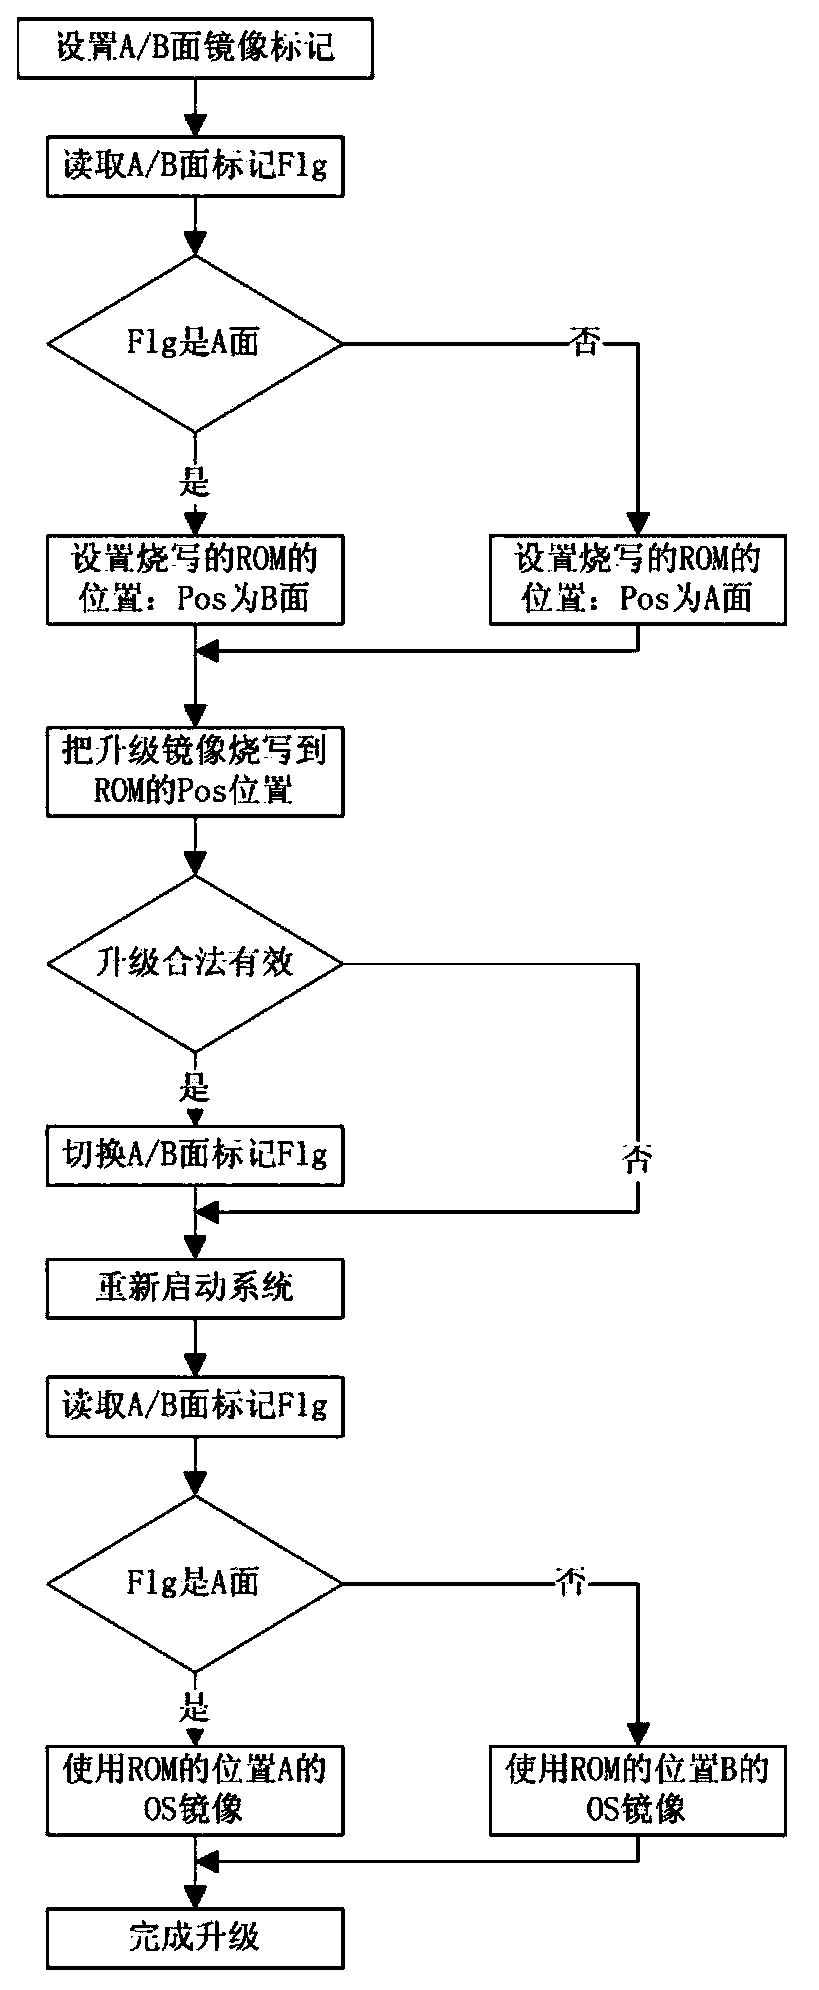 System software upgrading method for embedded products